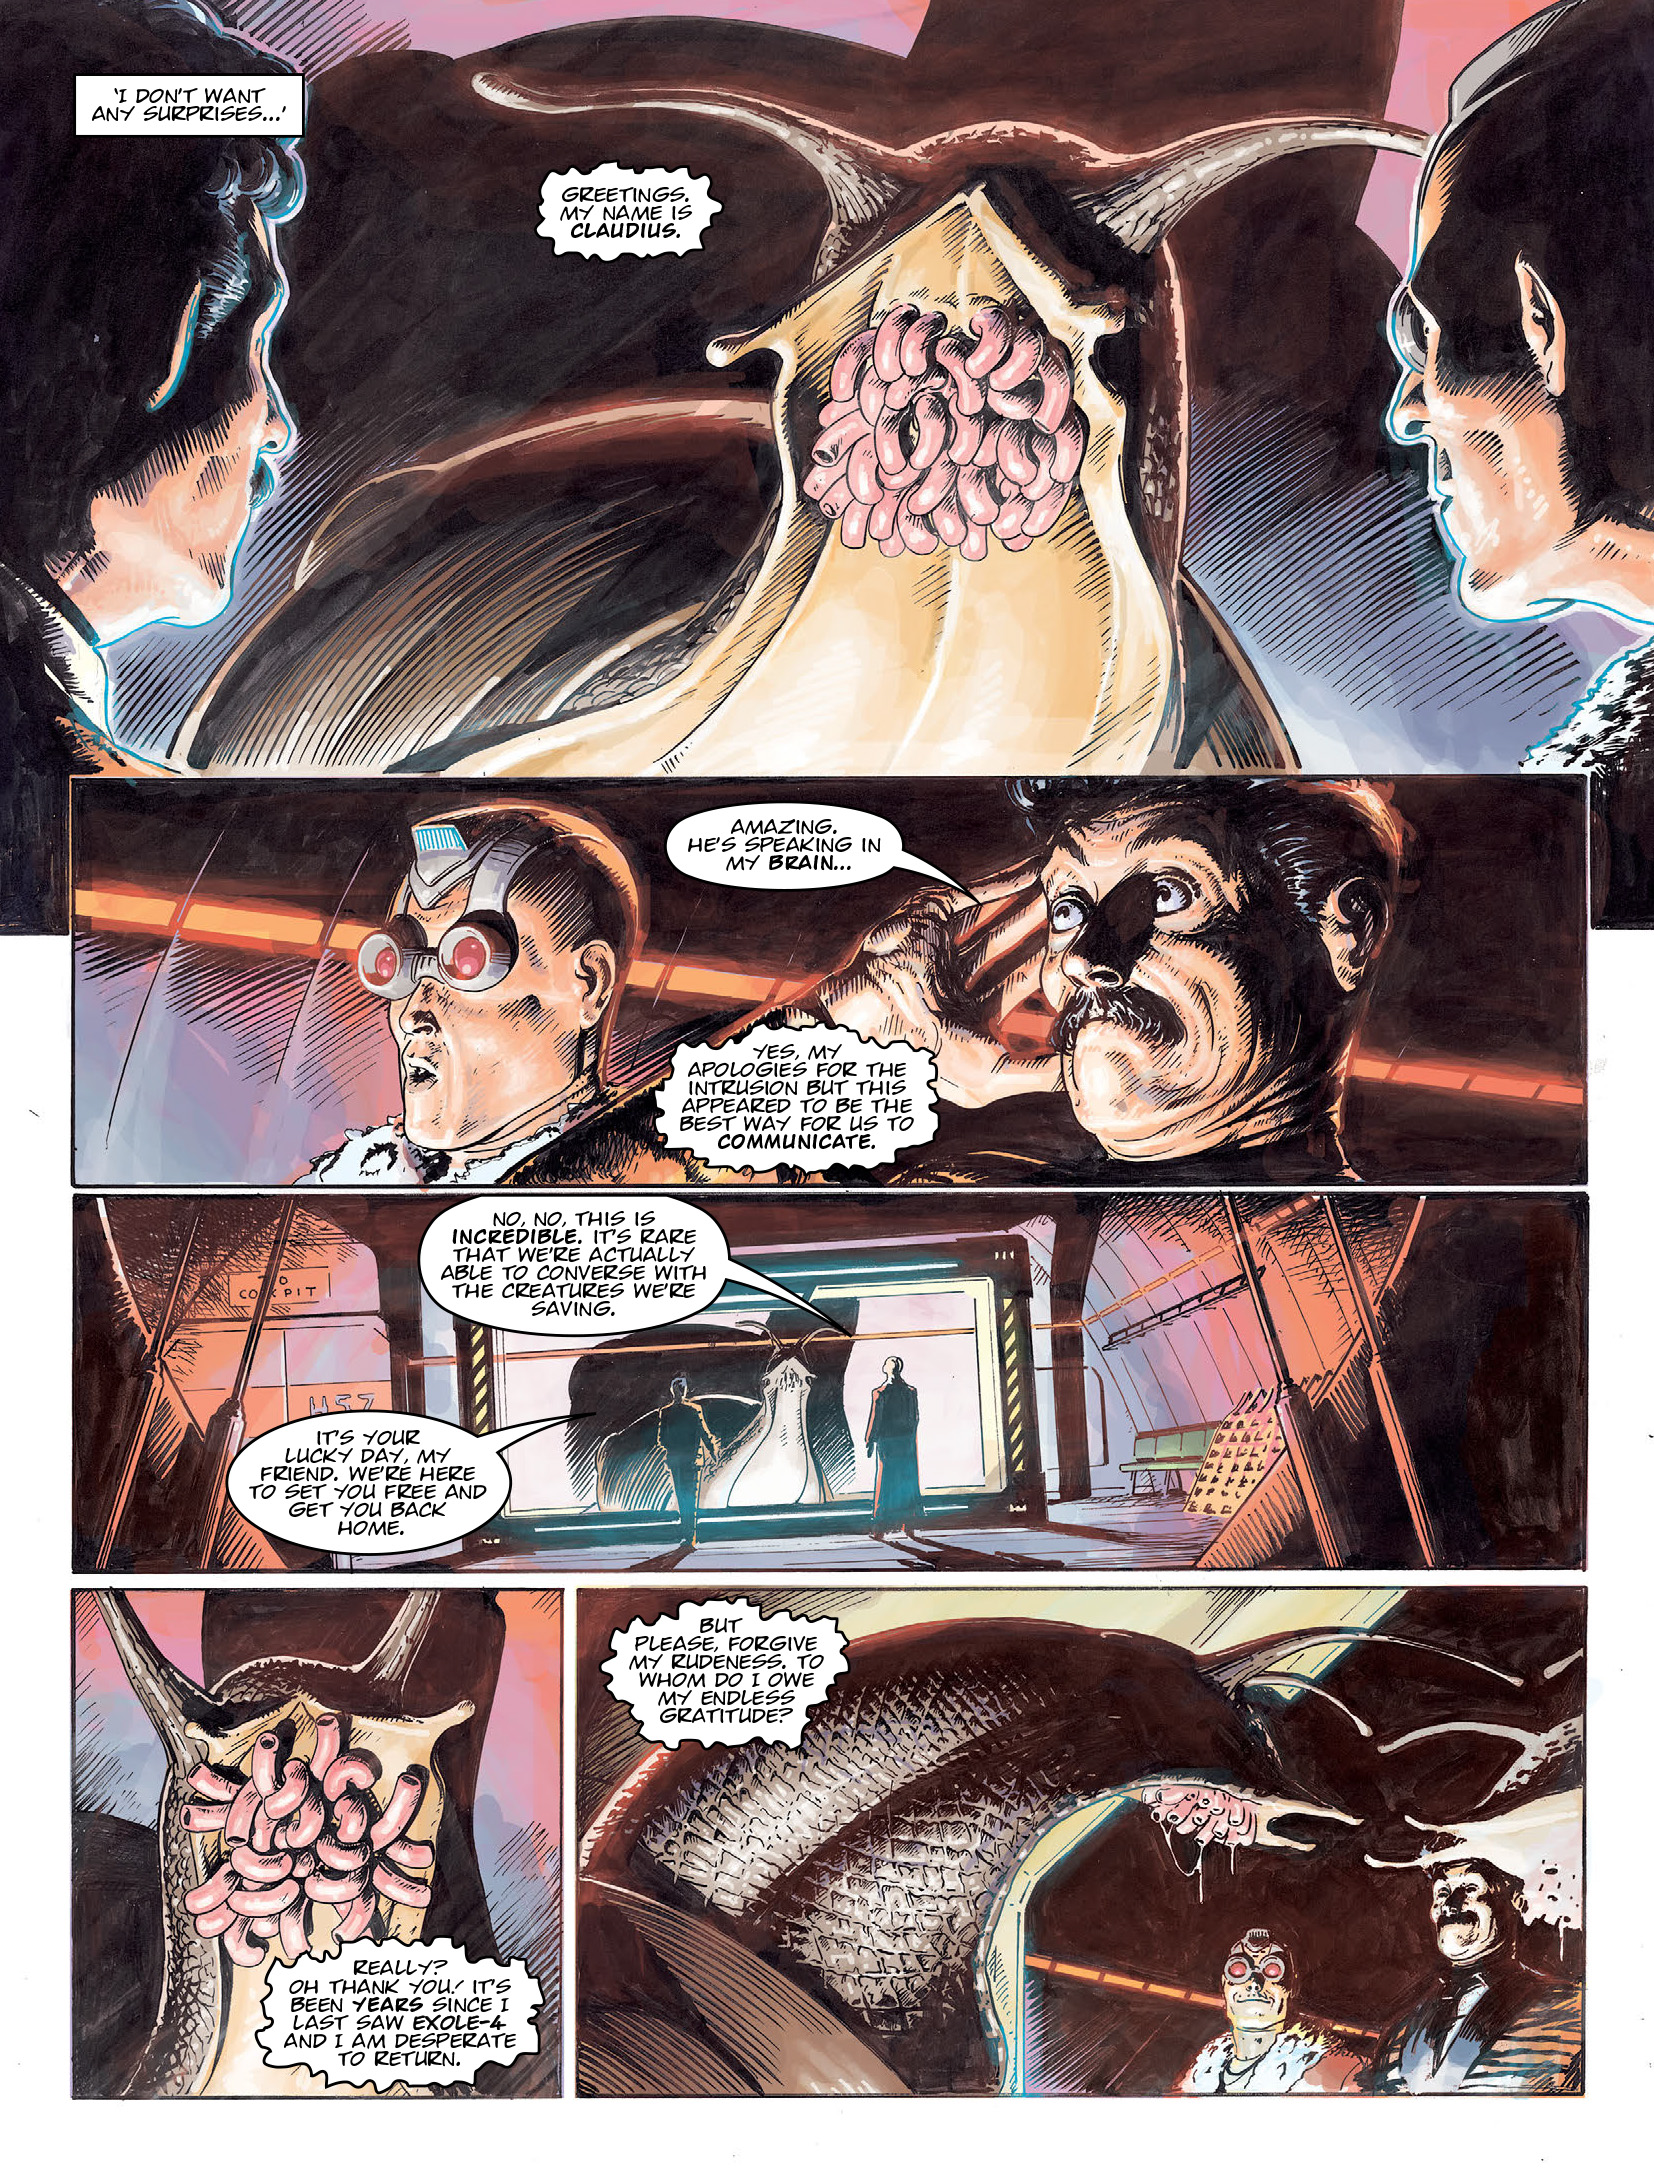 2000 AD: Chapter 2140 - Page 5